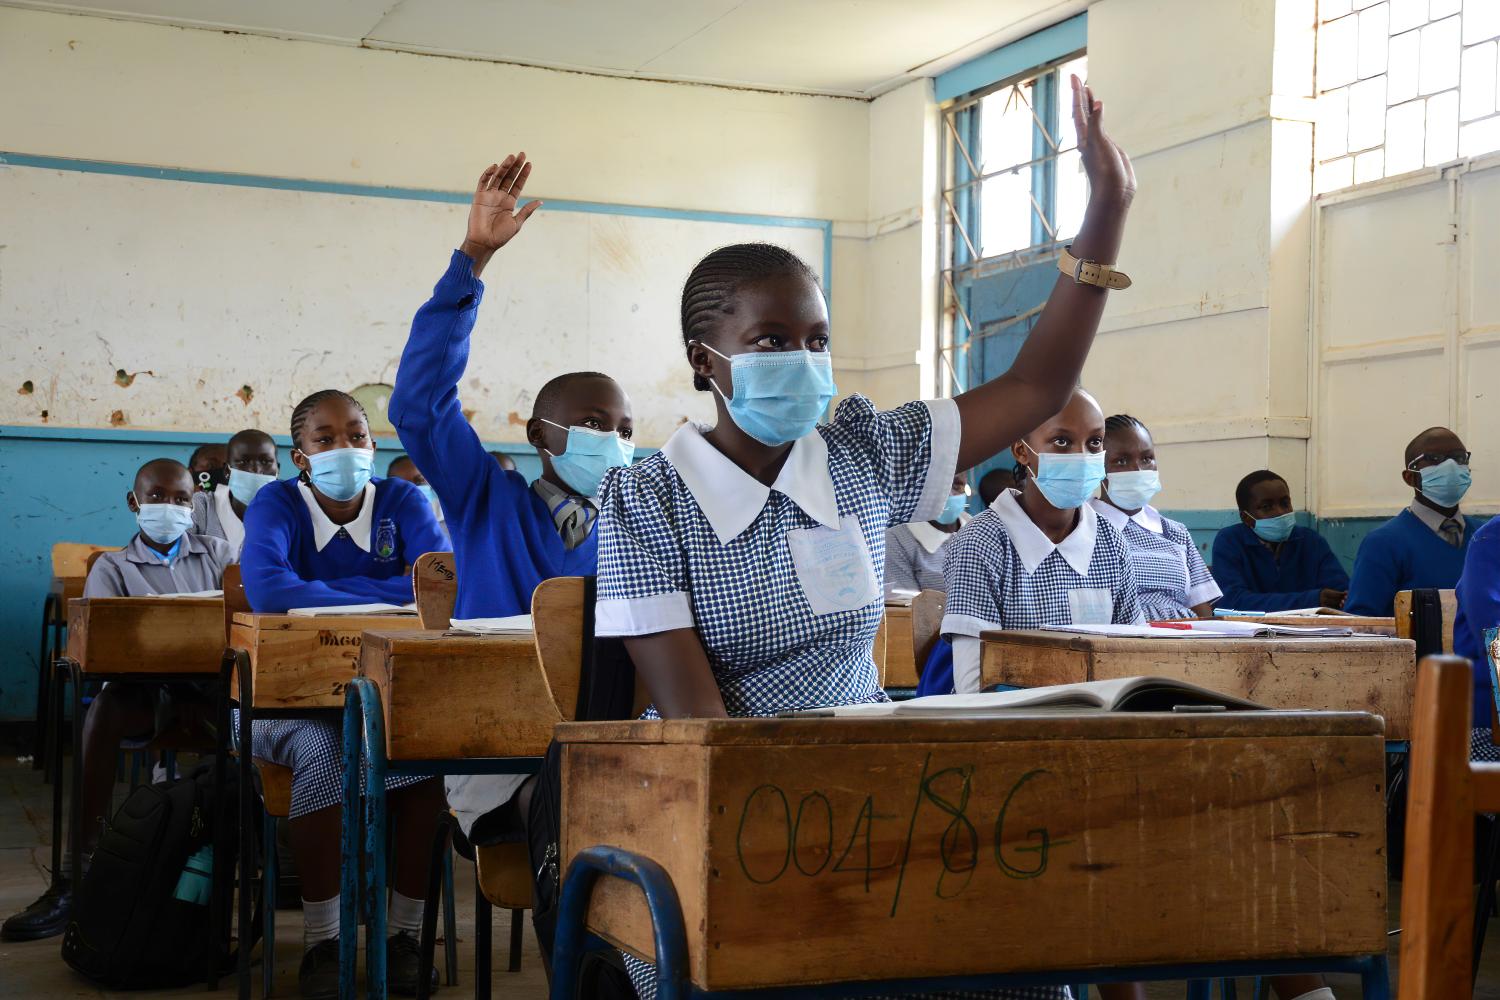 Pupils of  Kilimani Primary School attend class while wearing face masks following the full-reopening of schools in the country after the government closed all learning institutions due to COVID-19. (Photo by Dennis Sigwe / SOPA Images/Sipa USA)No Use UK. No Use Germany.